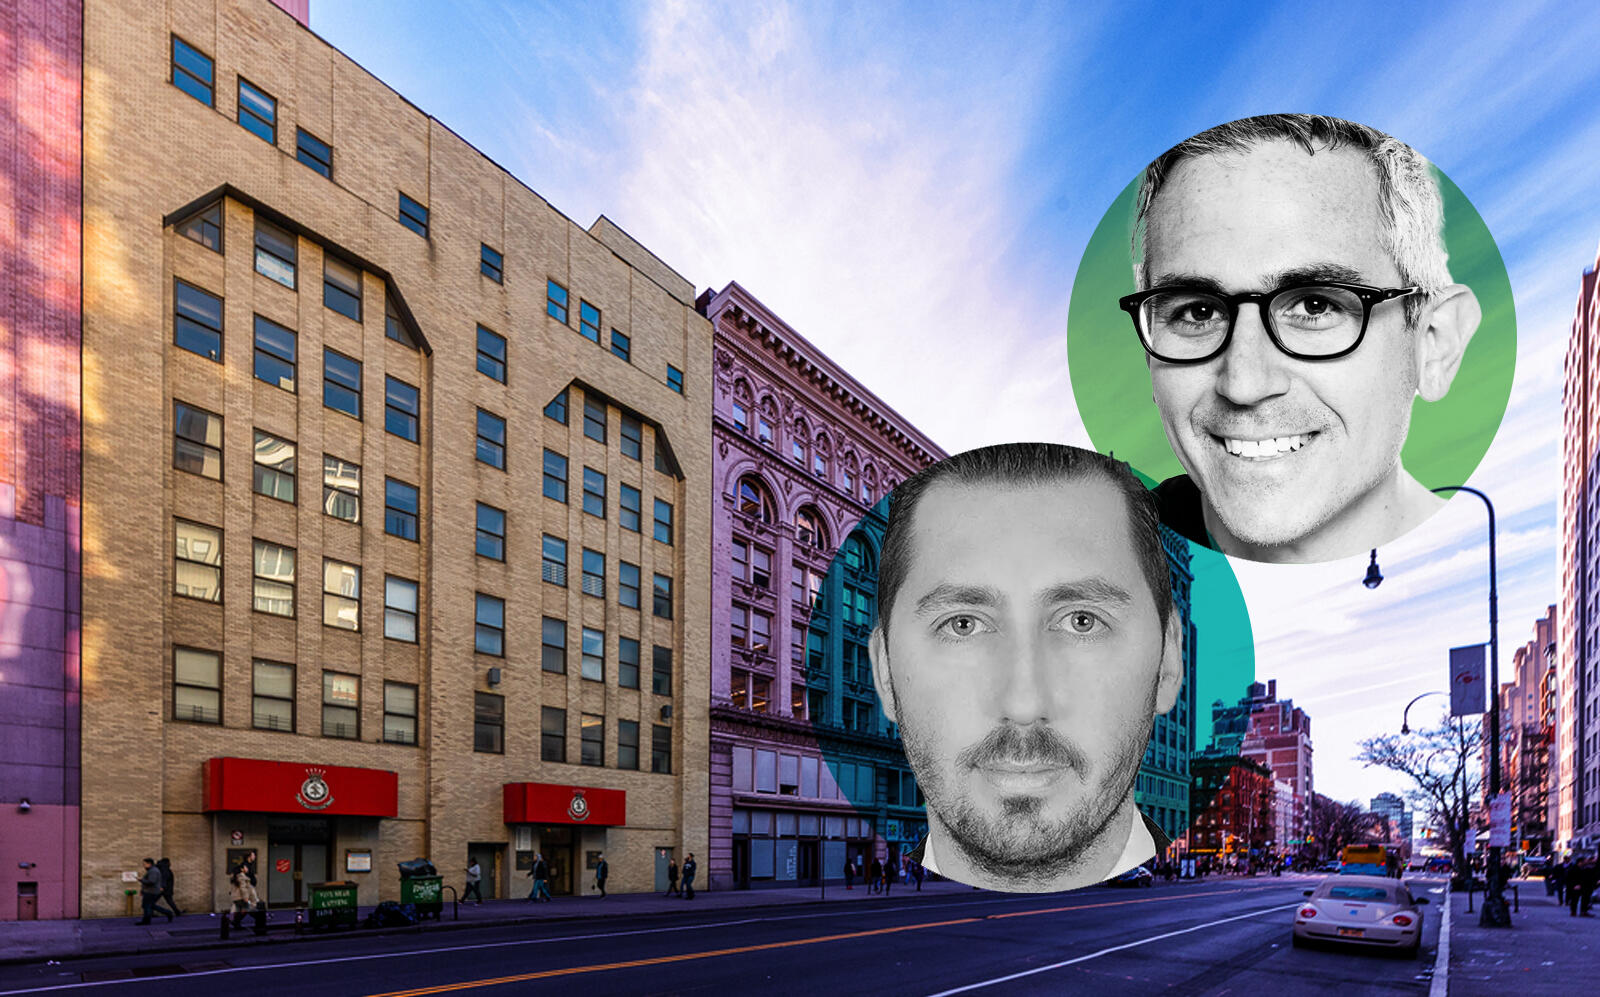 132 West 14th Street and KPG’s co-founders Rod Kritsberg and Gregory Kraut (Avison Young, KPG)